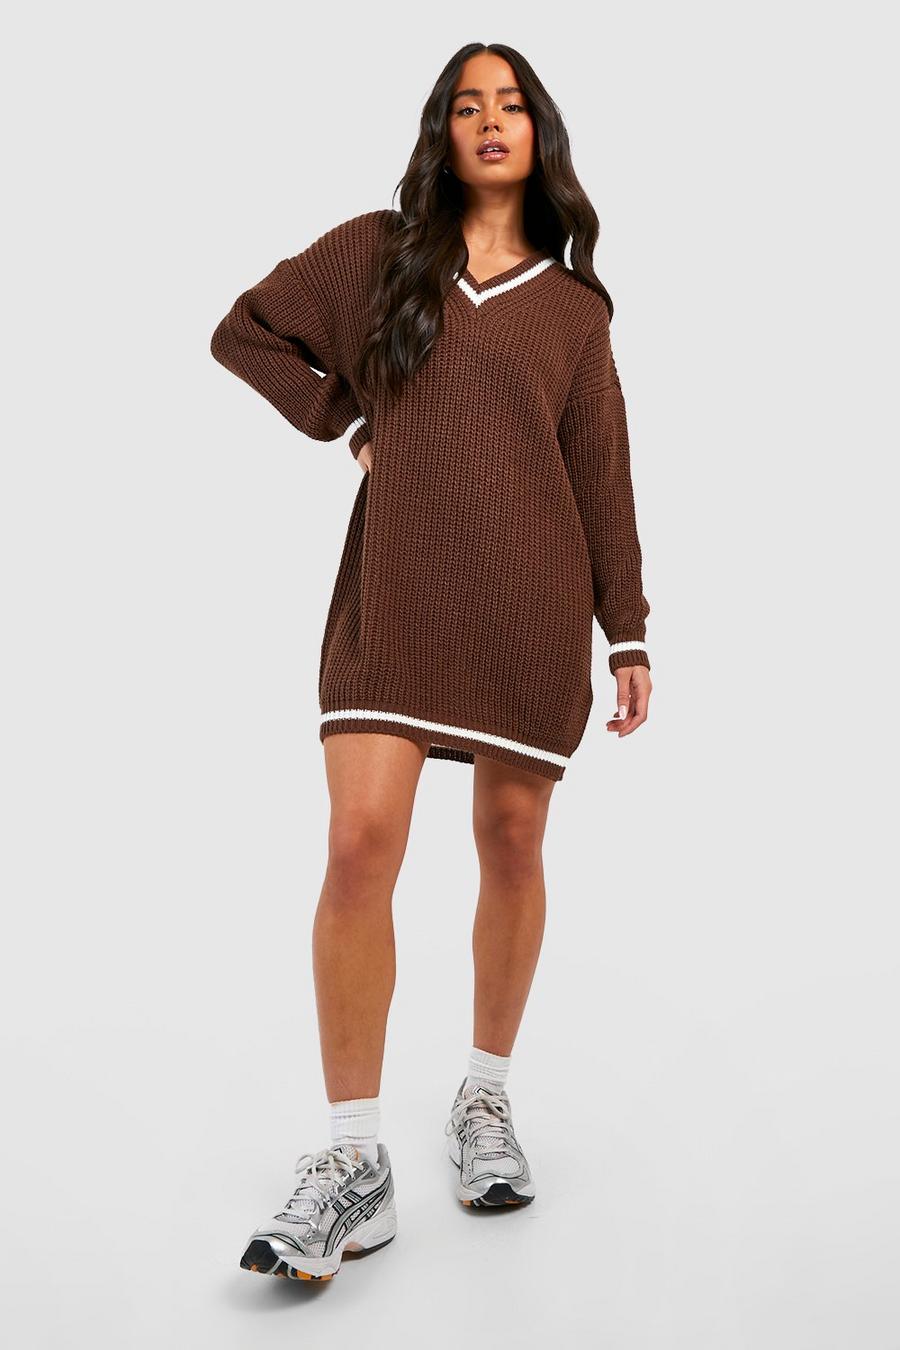 Chocolate brown Petite V Neck Knitted Sweater Dress